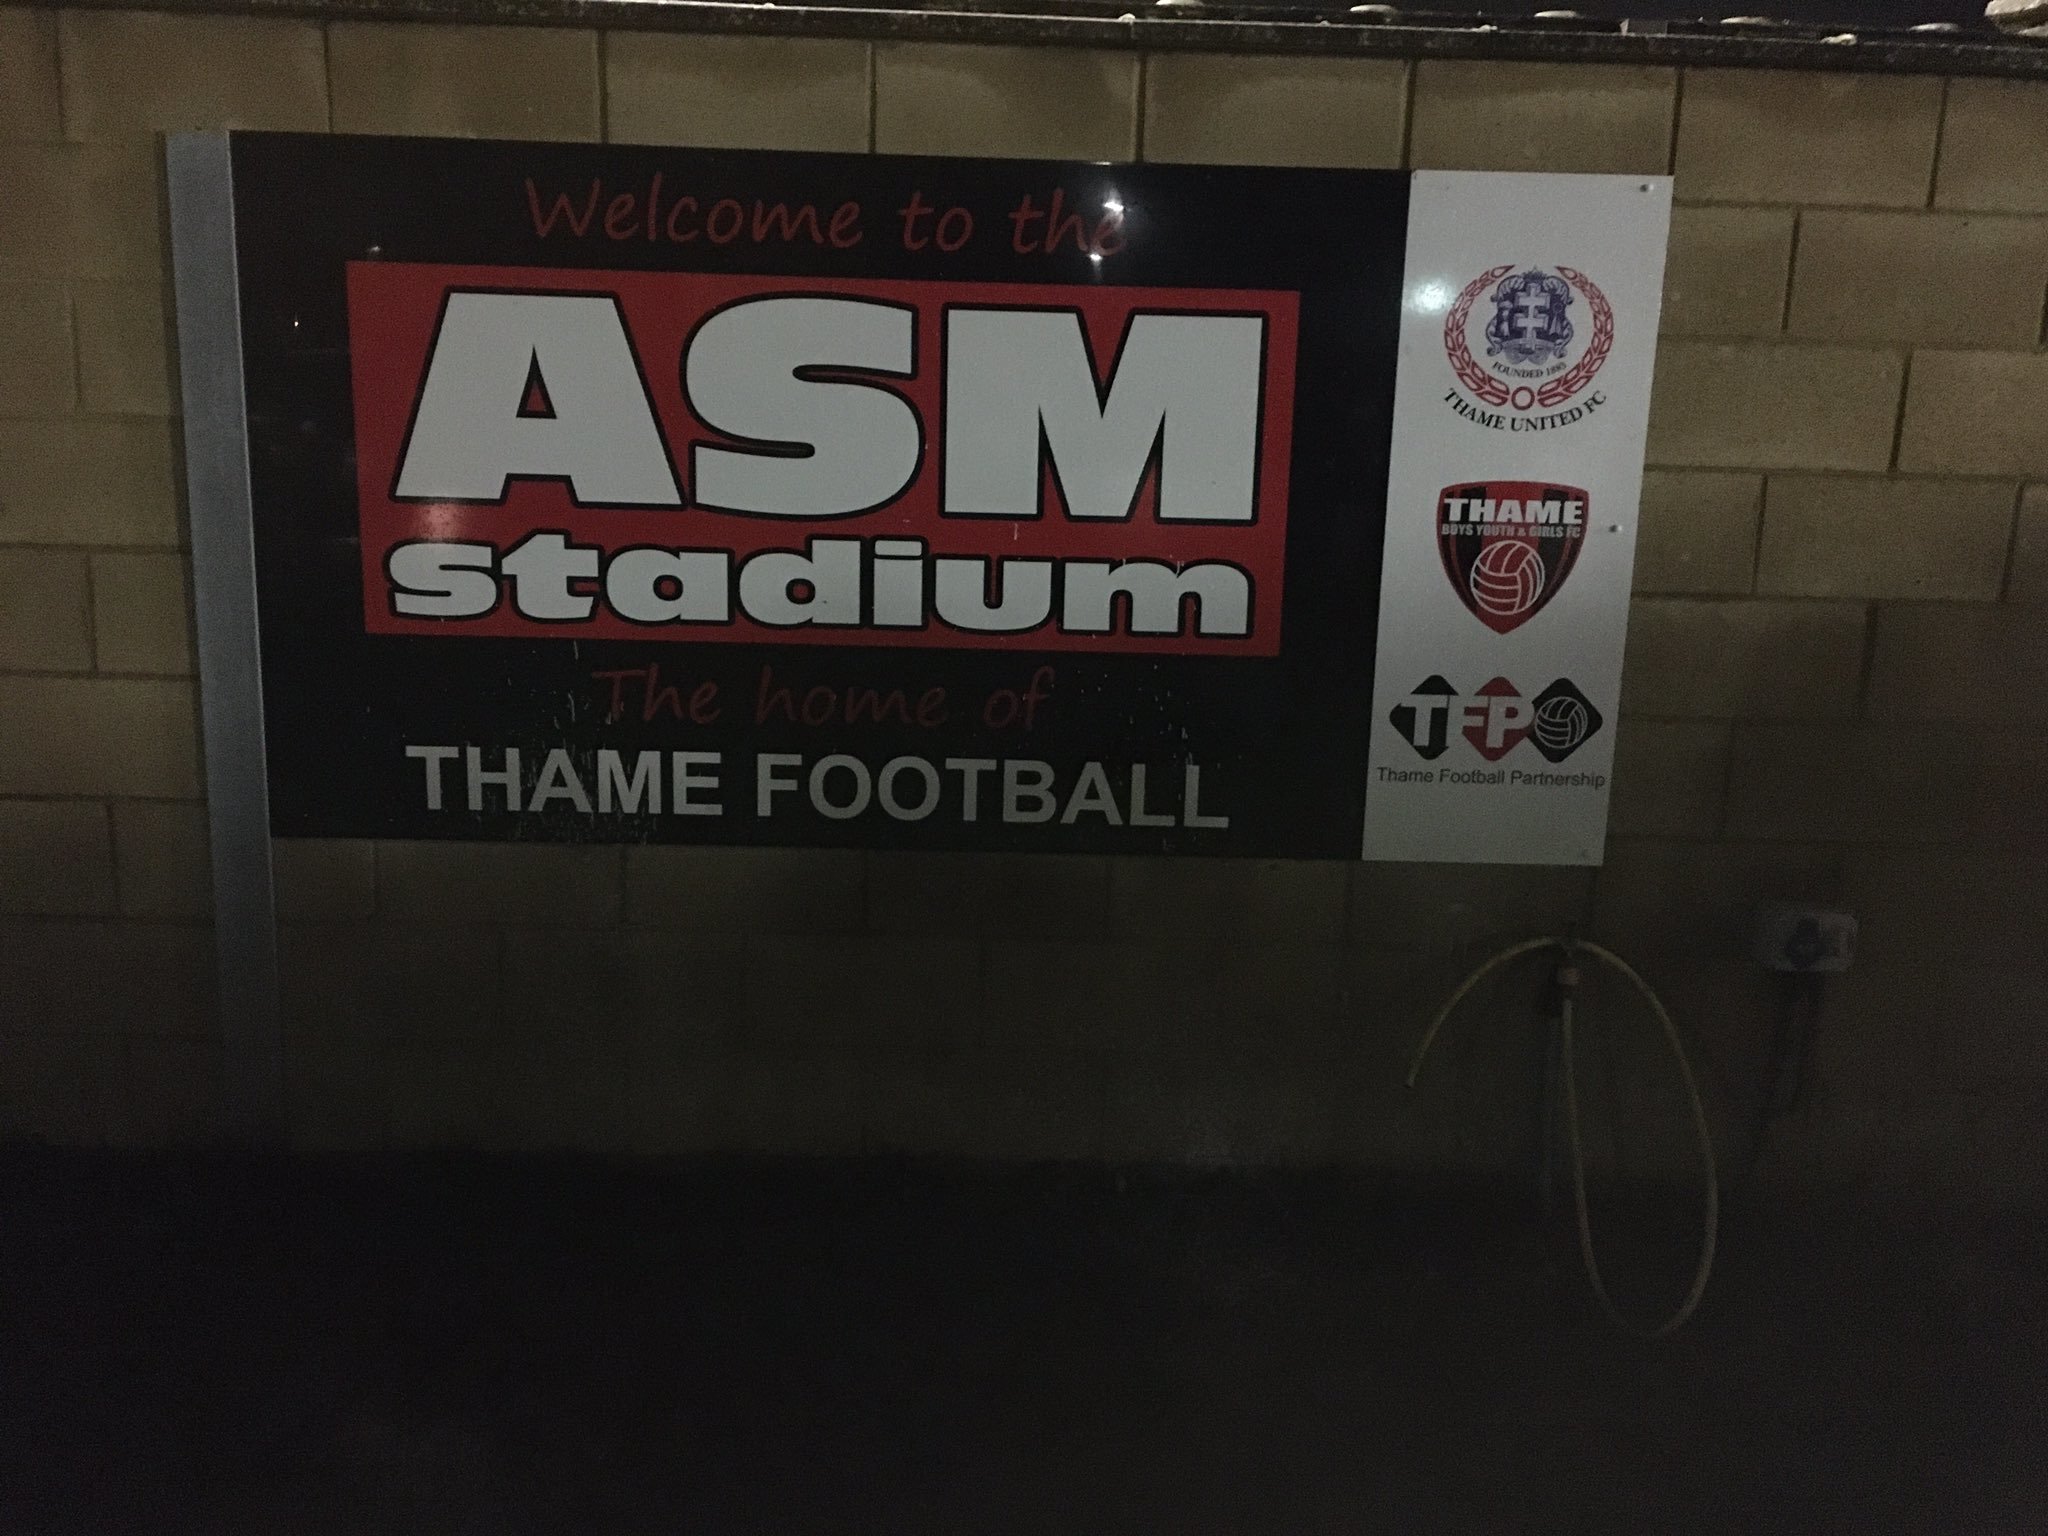 It took place at the ASM Stadium in Thame 